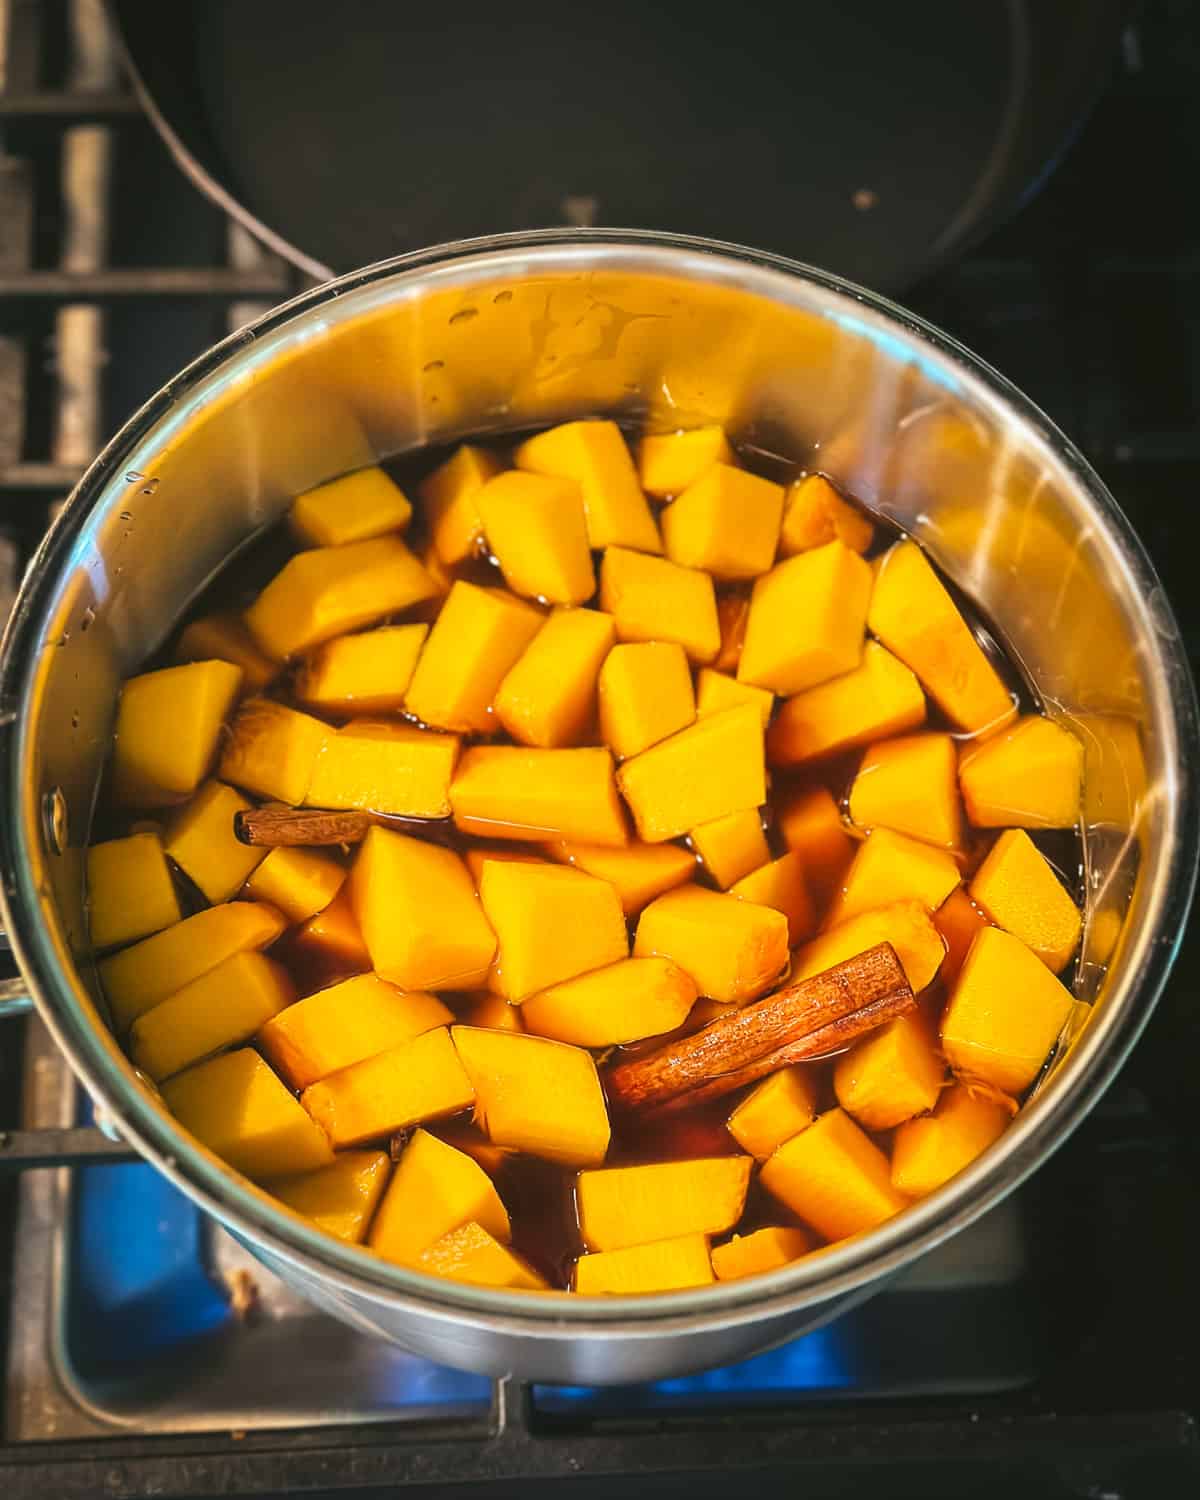 Pumpkin cubes, cinnamon sticks, and other ingredients in a pot on the stove, top view. 